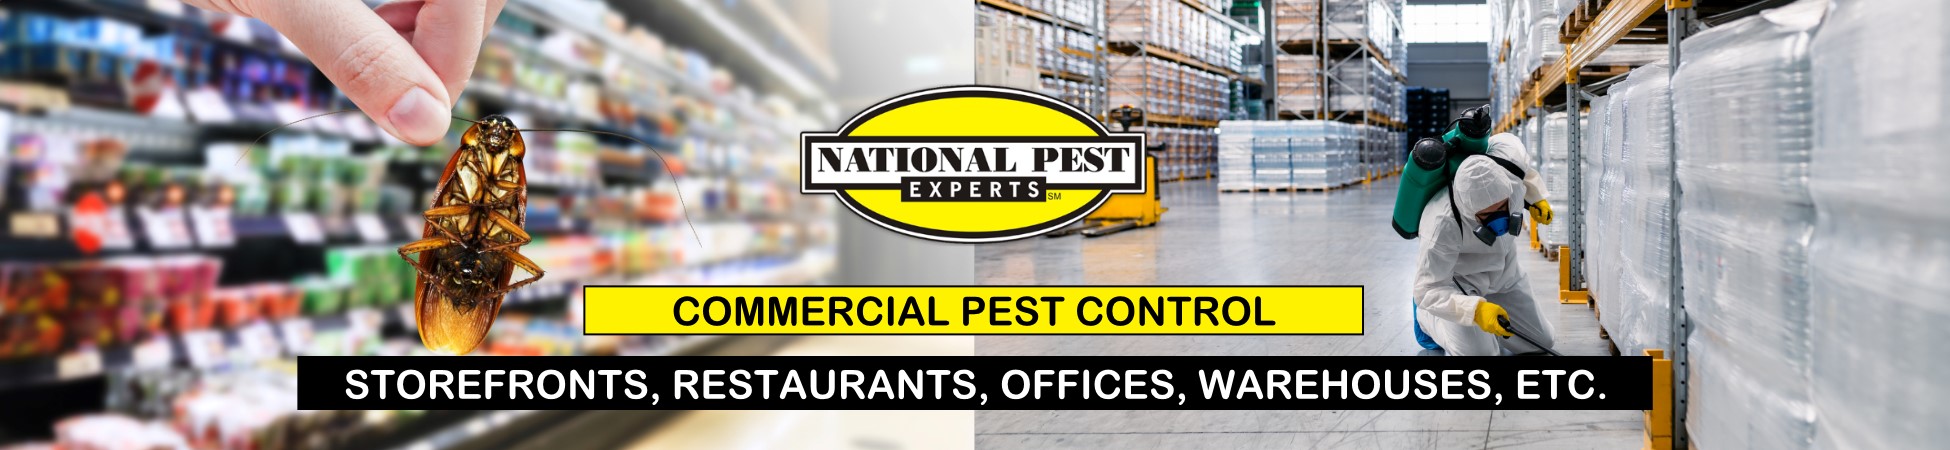 National Pest Experts - Commercial & Industrial exterminating and pest control in Oyster Bay Cove, NY